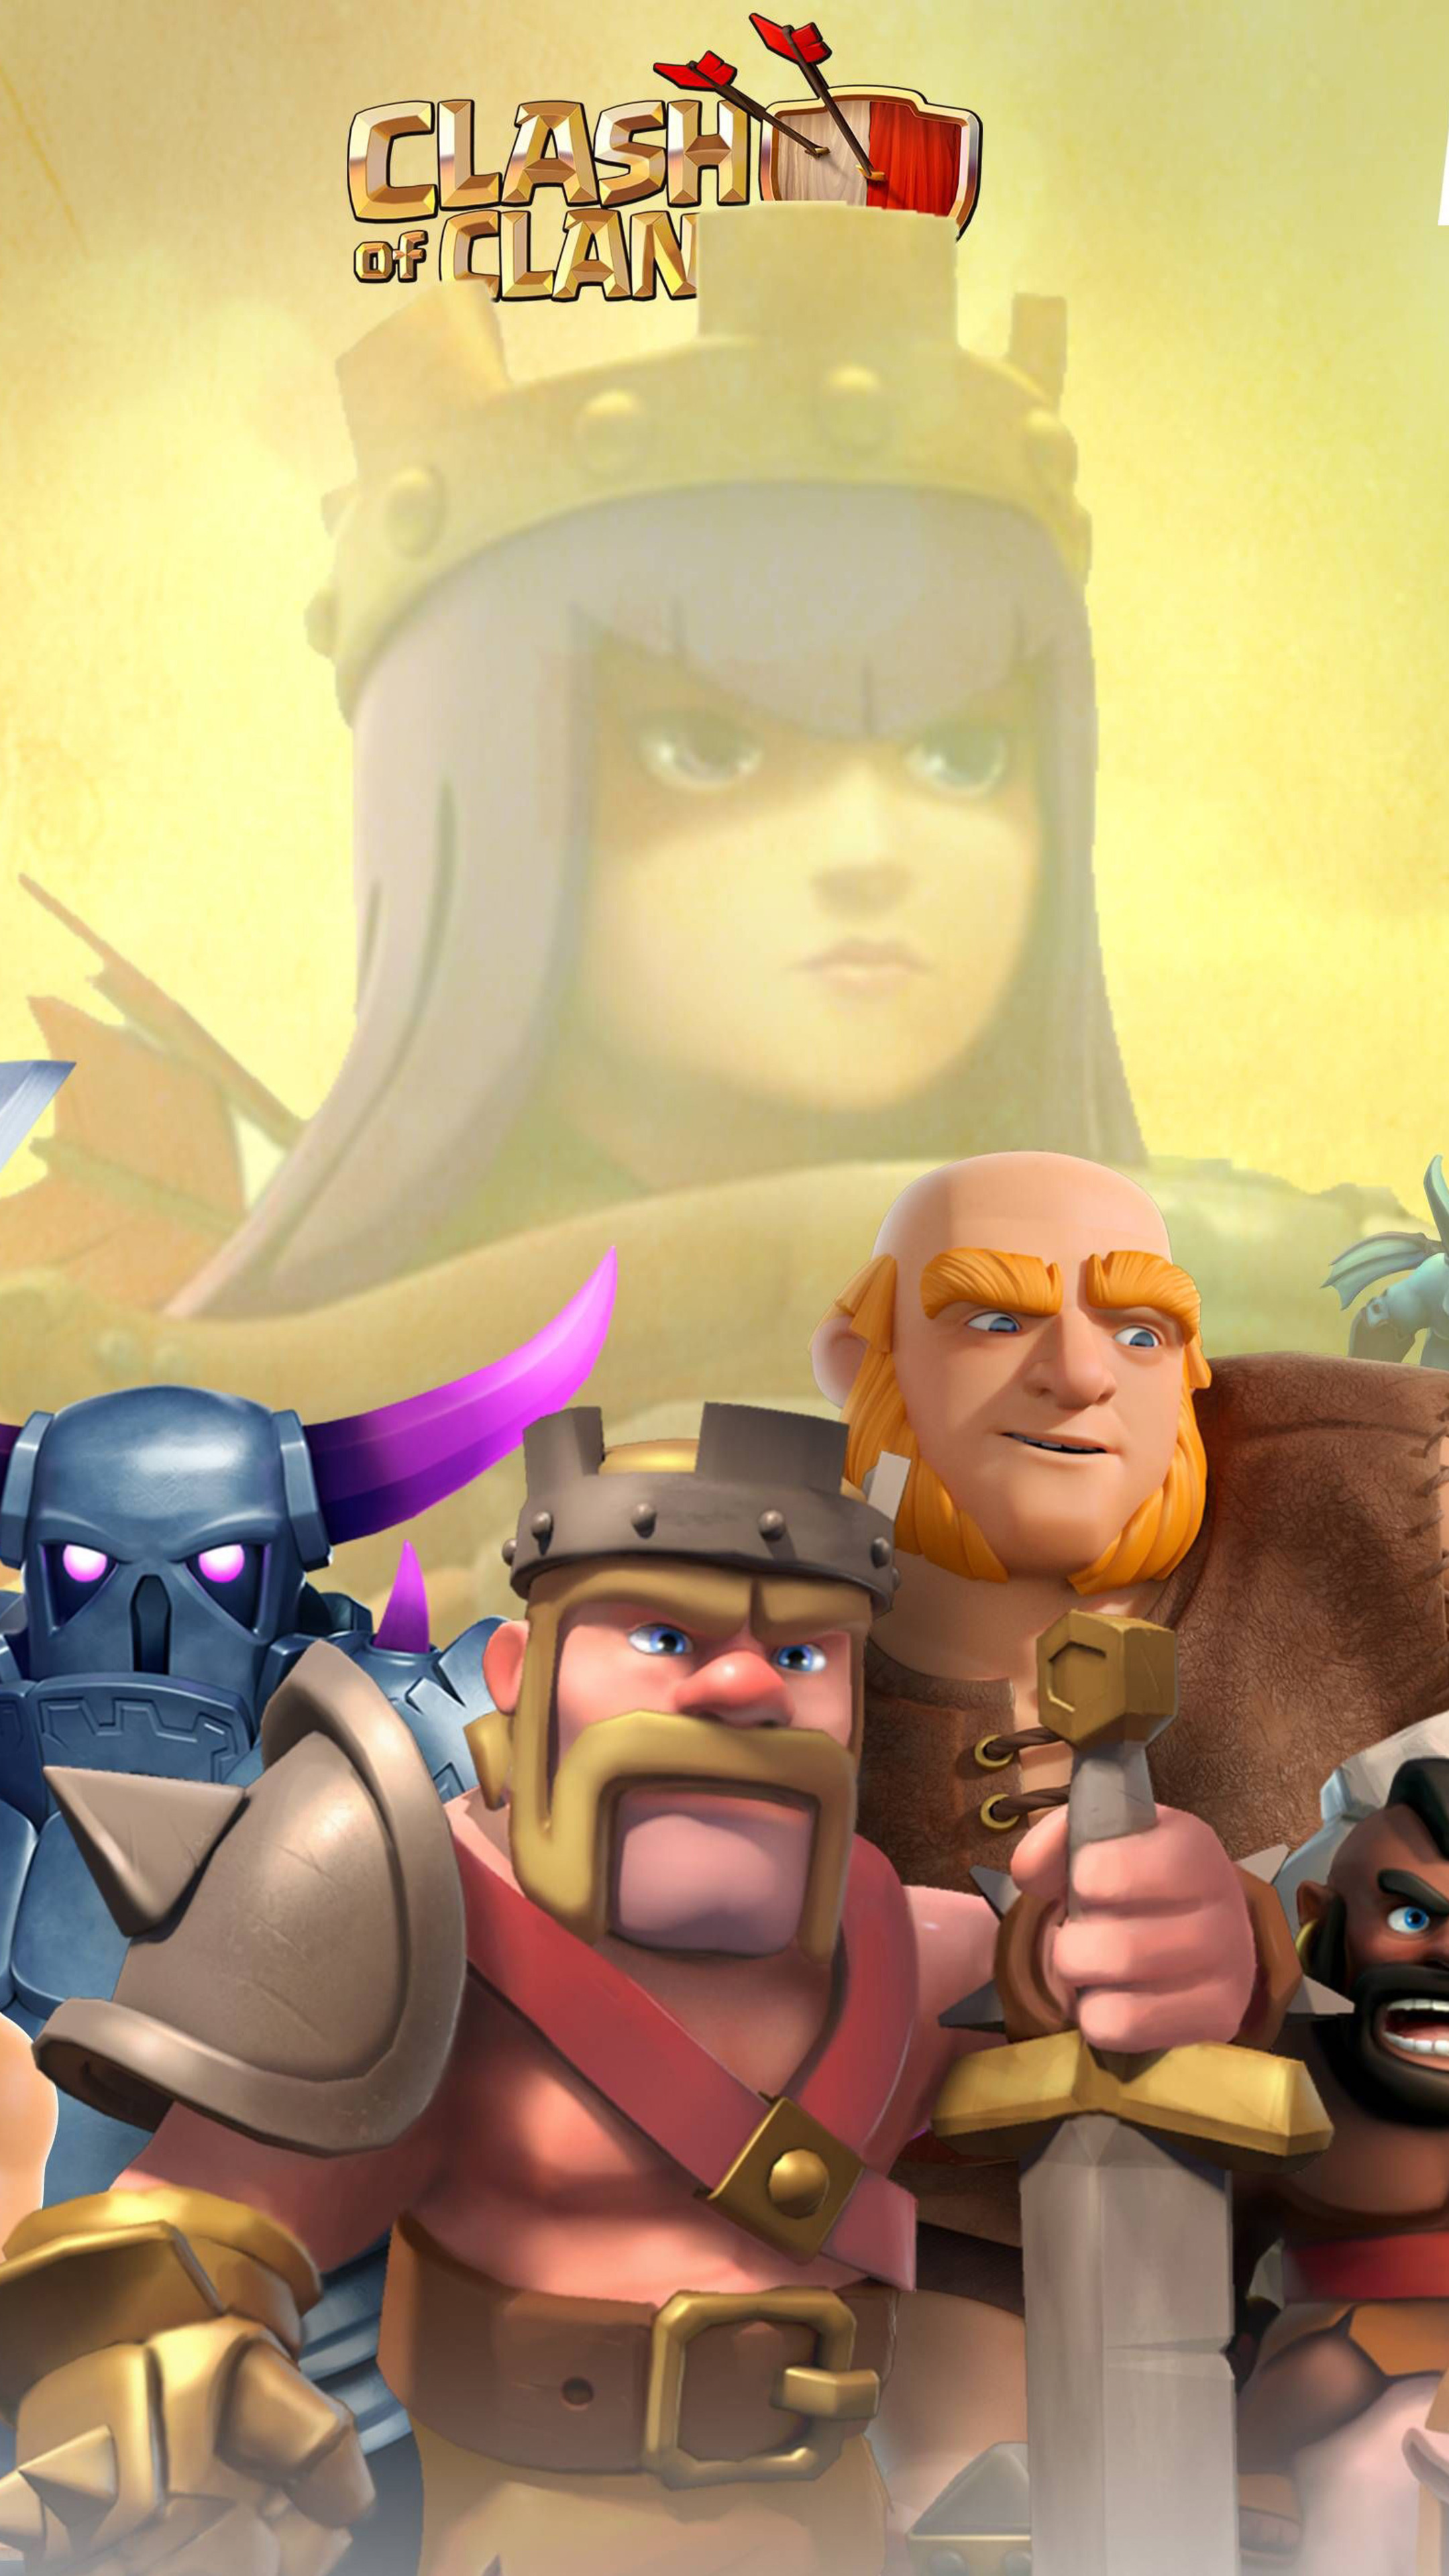 Clash of Clans: An online multiplayer strategy game published by Supercell. 2160x3840 4K Wallpaper.